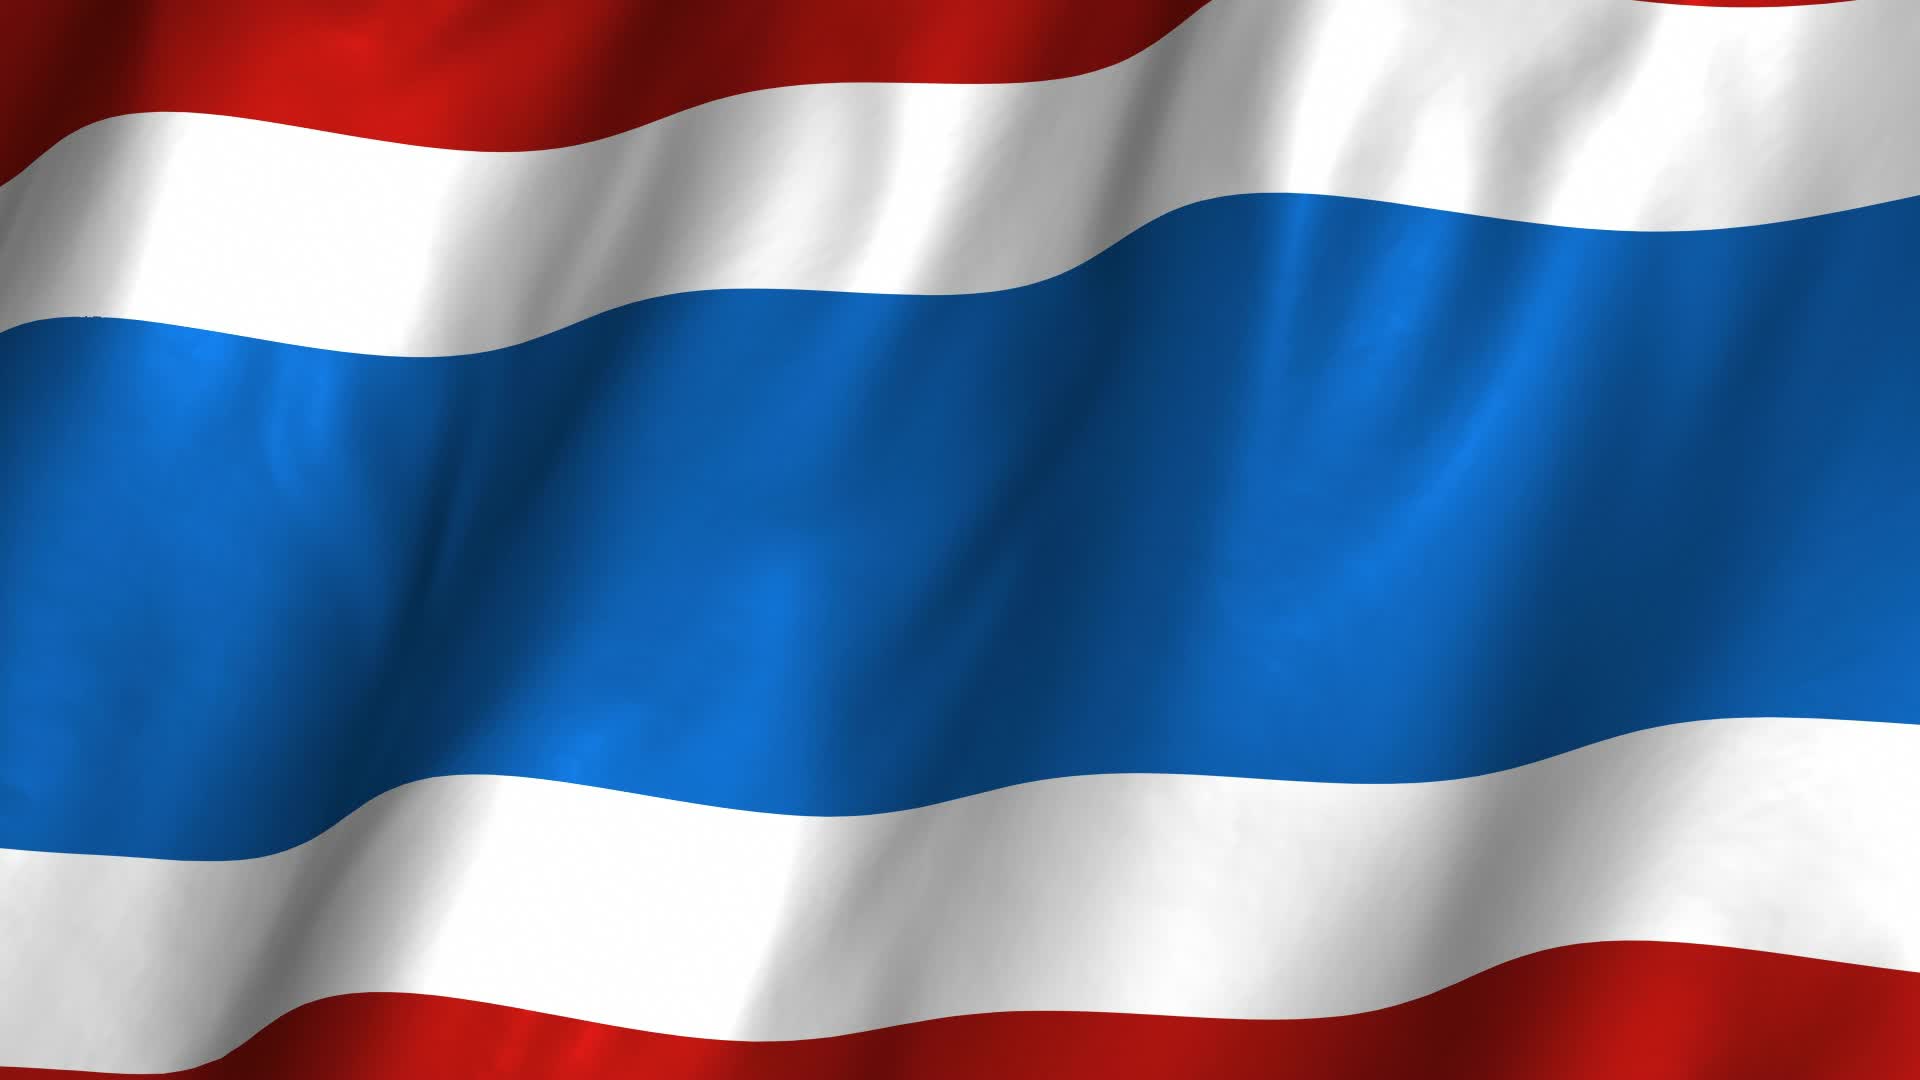 Thailand Flag Wallpapers - Wallpaper Cave